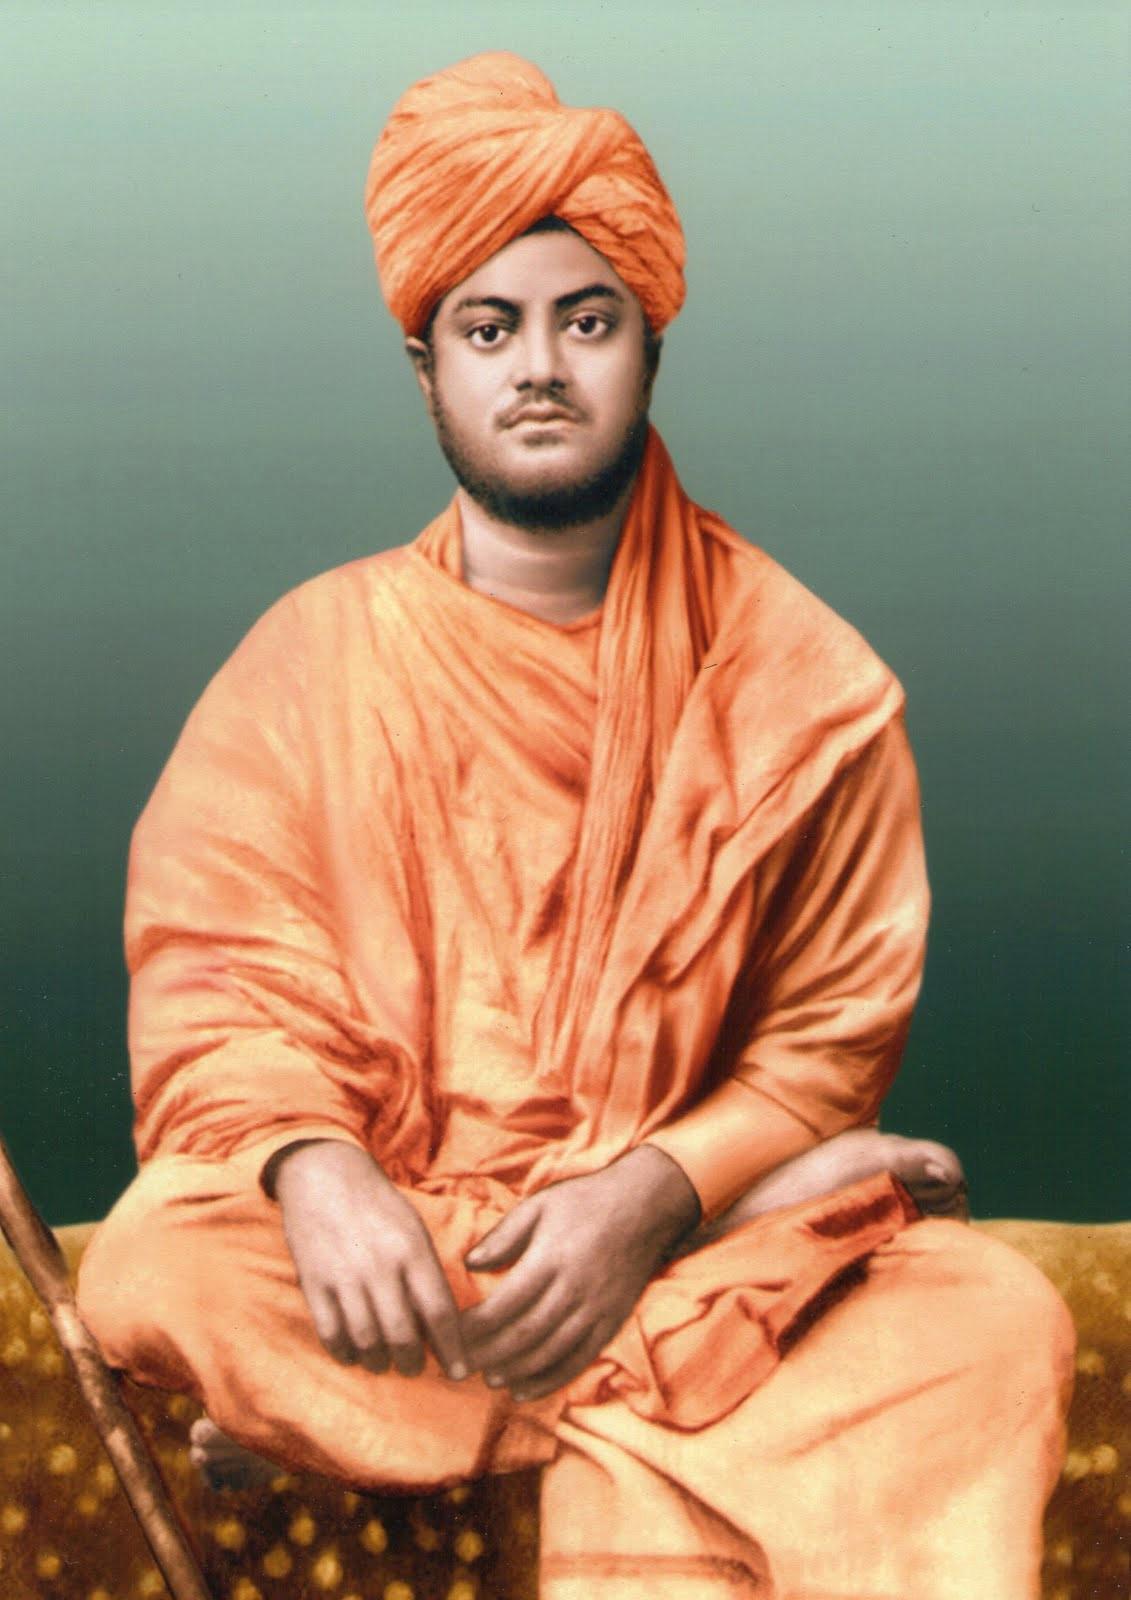 National Youth Day 2021 Wishes and WhatsApp Sticker Messages Swami Vivekananda  HD Images Telegram Quotes and Facebook Greetings to Celebrate the Great  Monks Birth Anniversary   LatestLY